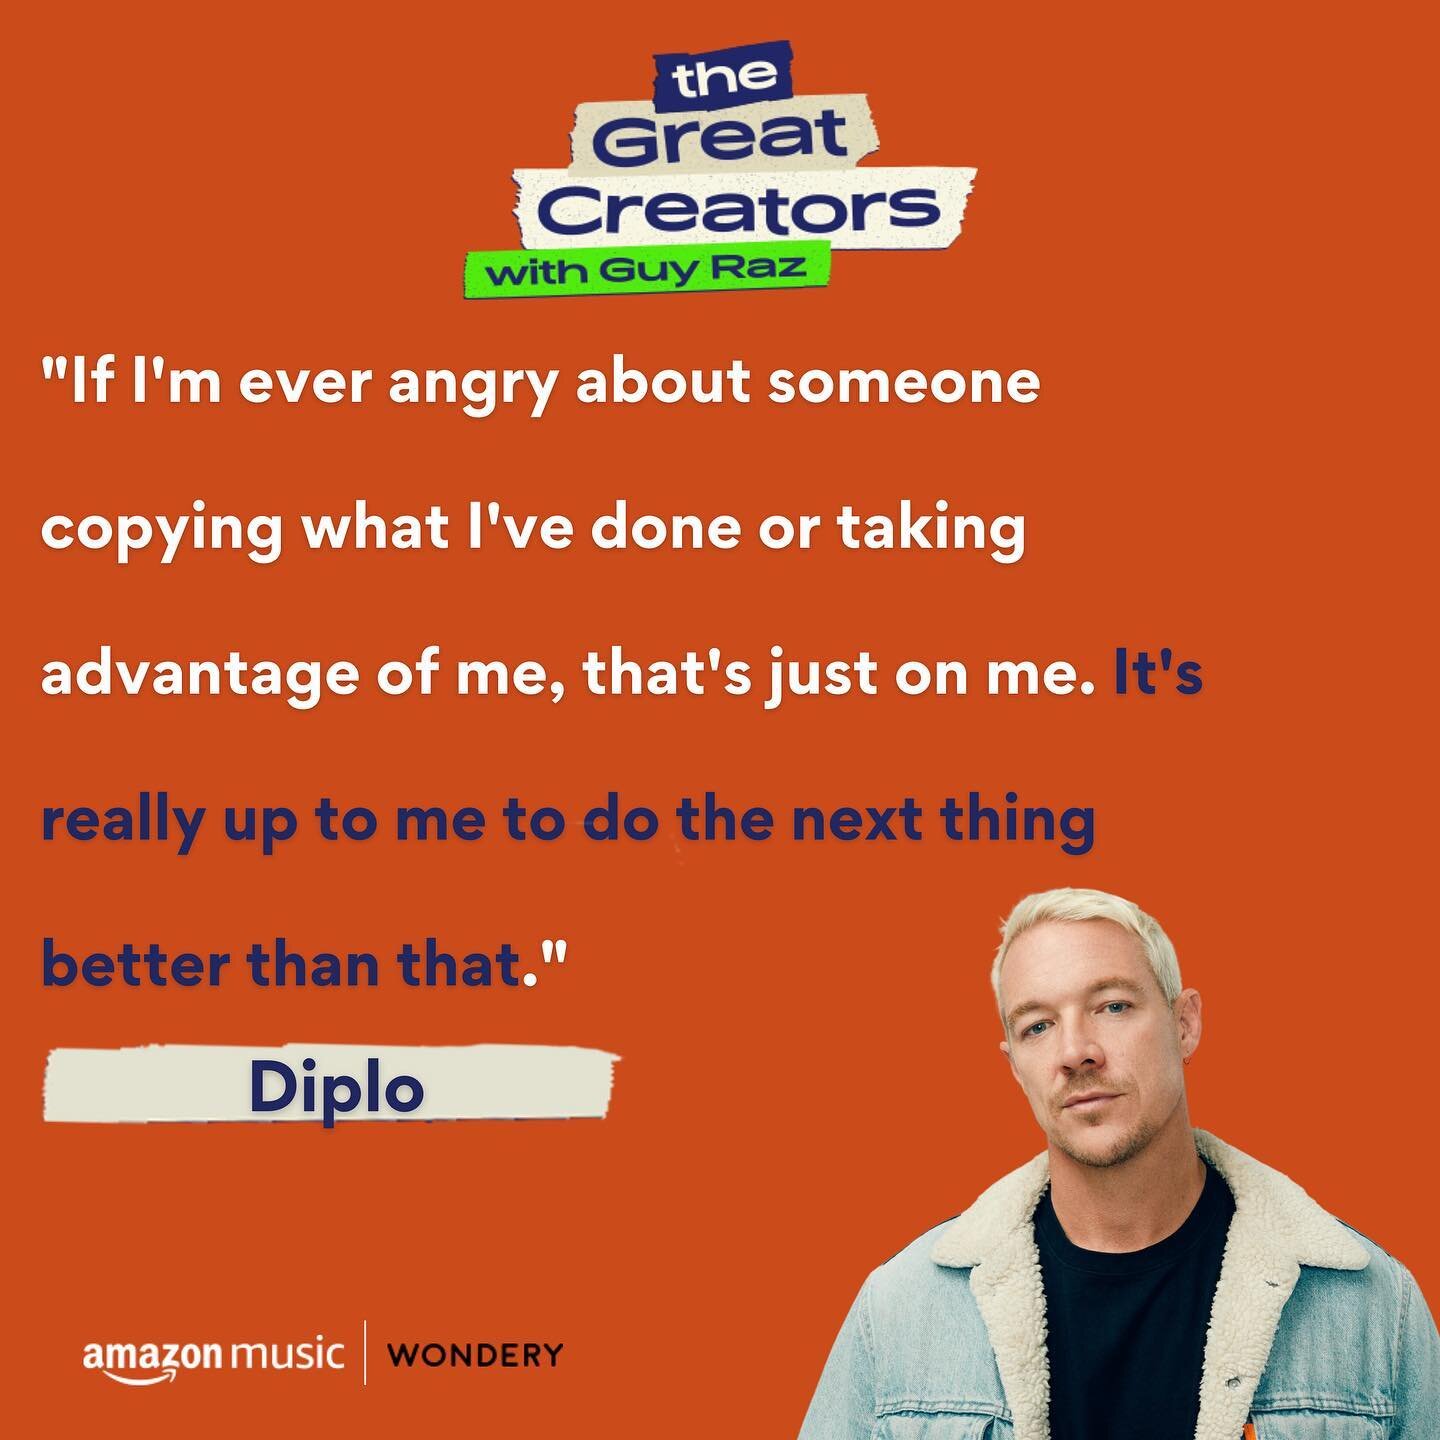 @diplo has always been one to anticipate the next best move. Check him out on #TheGreatCreators to hear how he used commitment and strategy to grow his career. 

#djdiplo #diplo #majorlazer #podcast